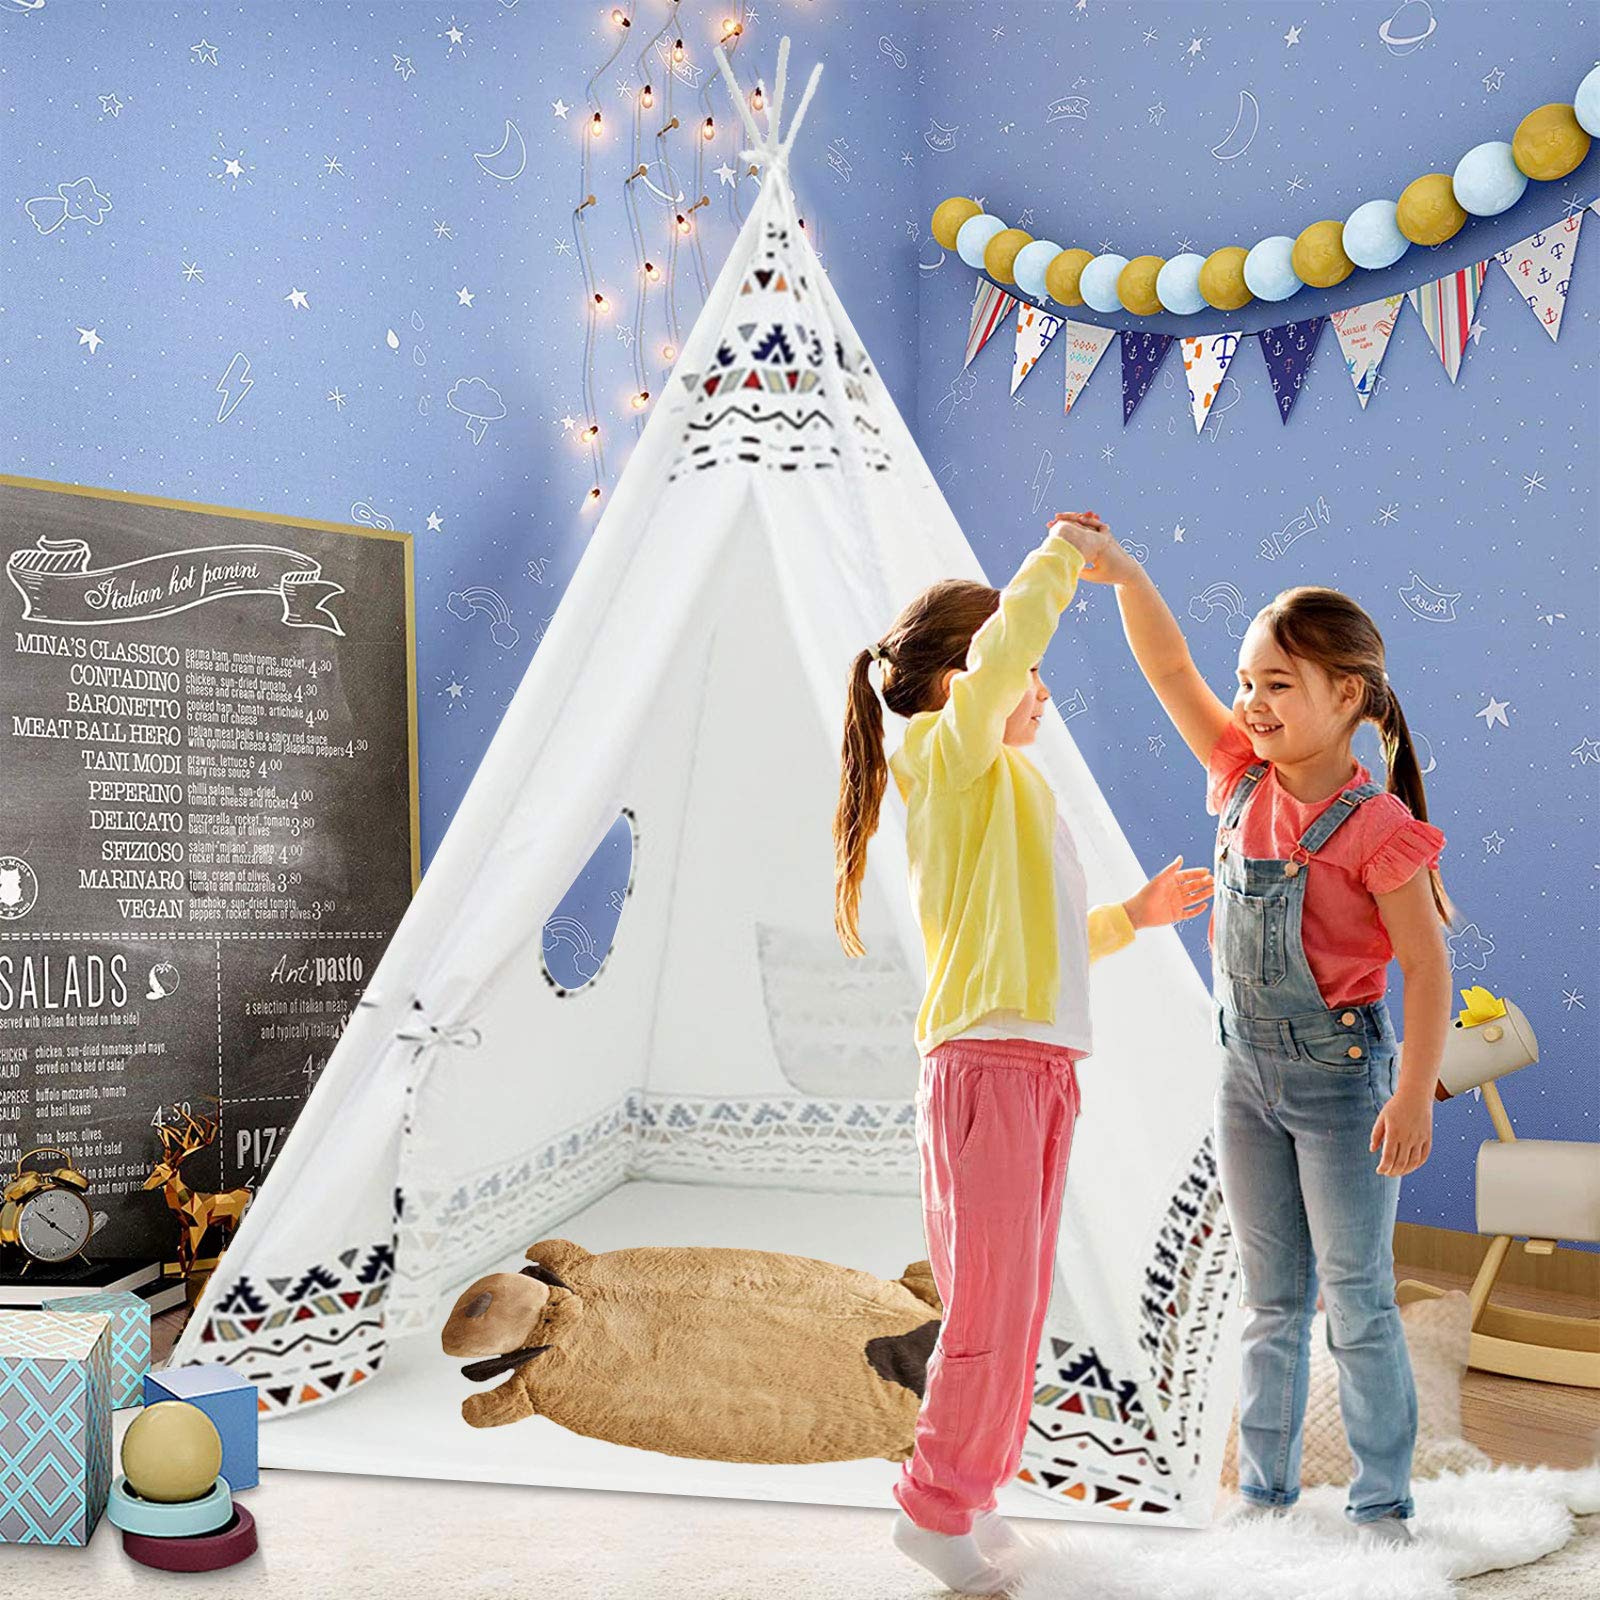 China wholesale Slide For Older Kids - Arkmiido Teepee Tent for Kids Raw White Canvas Teepee with Windows Carry Case Foldable Children Play Tents Playhouse Toys for Baby Toddler Girls/Boys Indoor ...